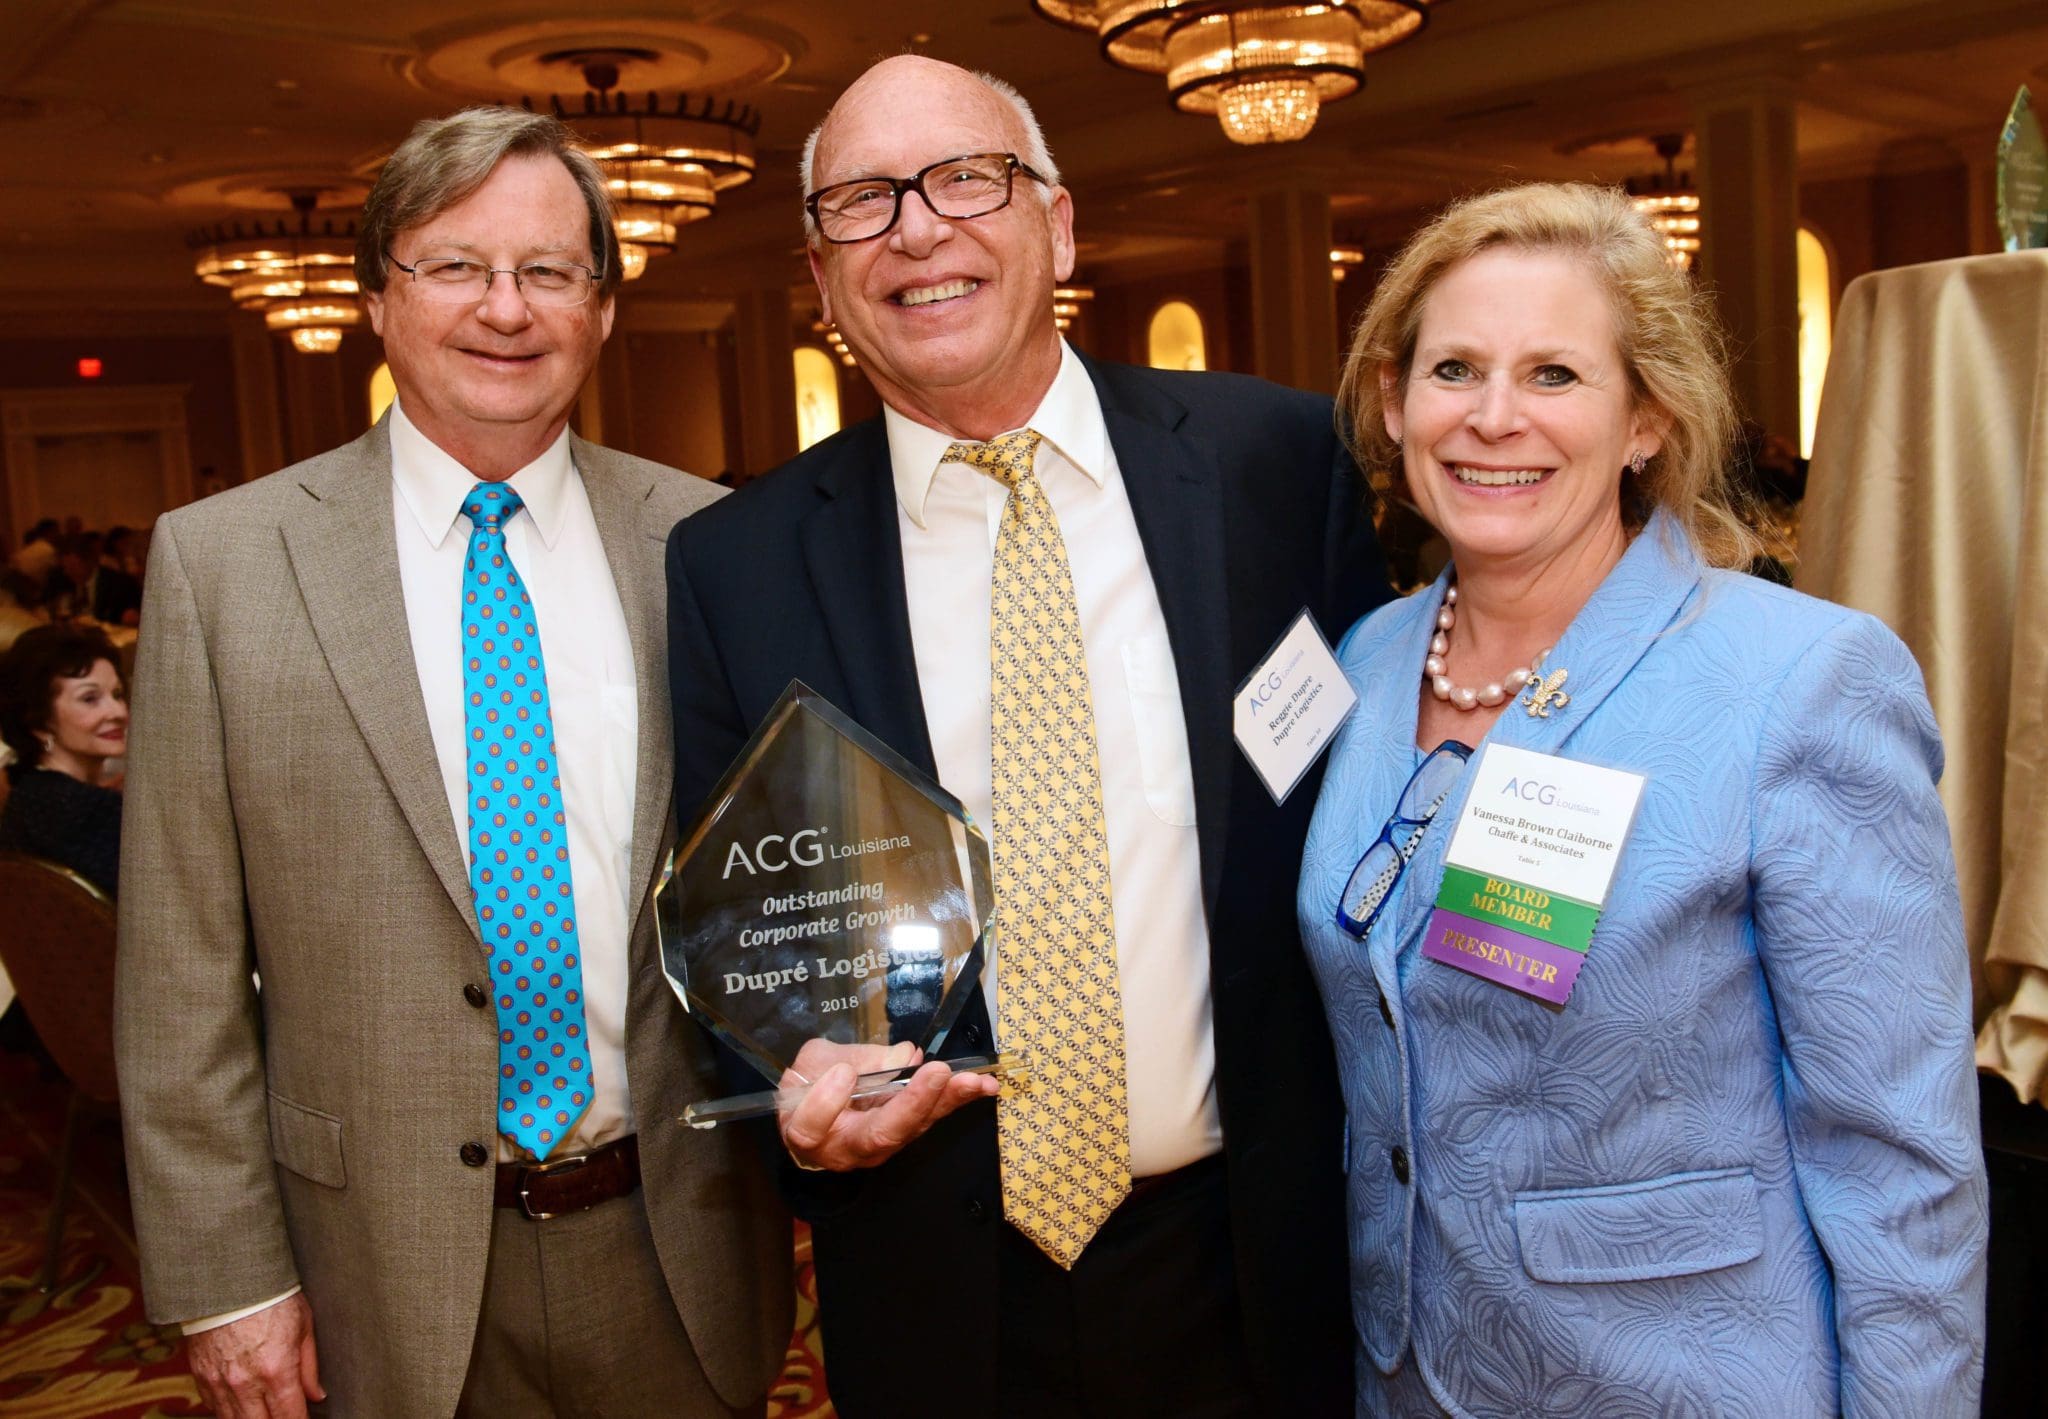 Dupré named Outstanding Corporate Growth by Louisiana Association for Corporate Growth